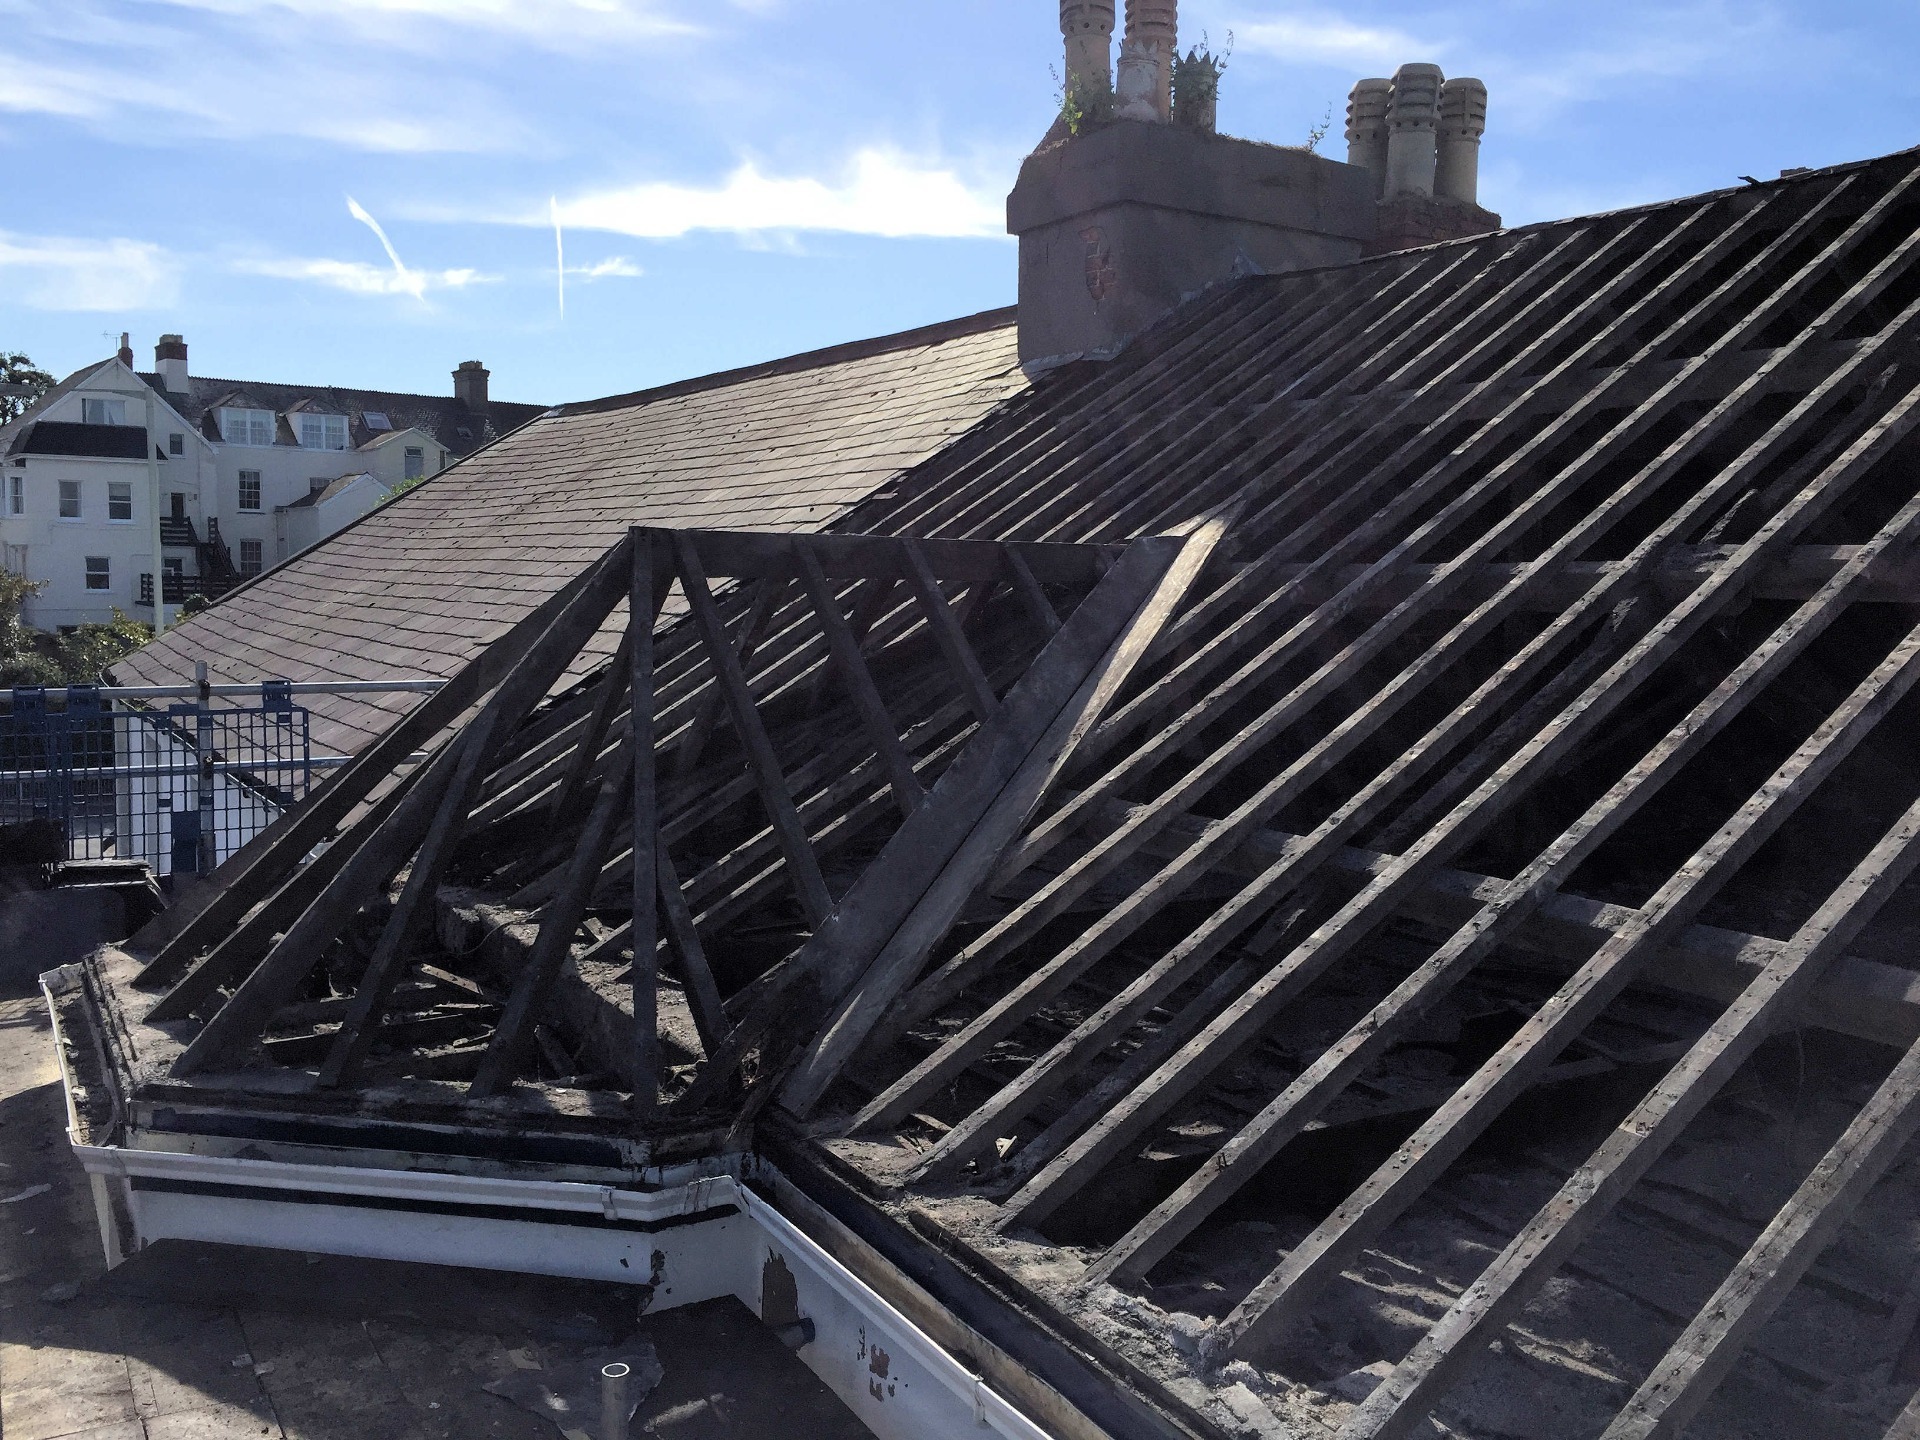 Roof stripped back to original rafters, saving as many original slates as possible for re-use. All damaged timbers were replaced at this point by MJS Building Maintenance Ltd.